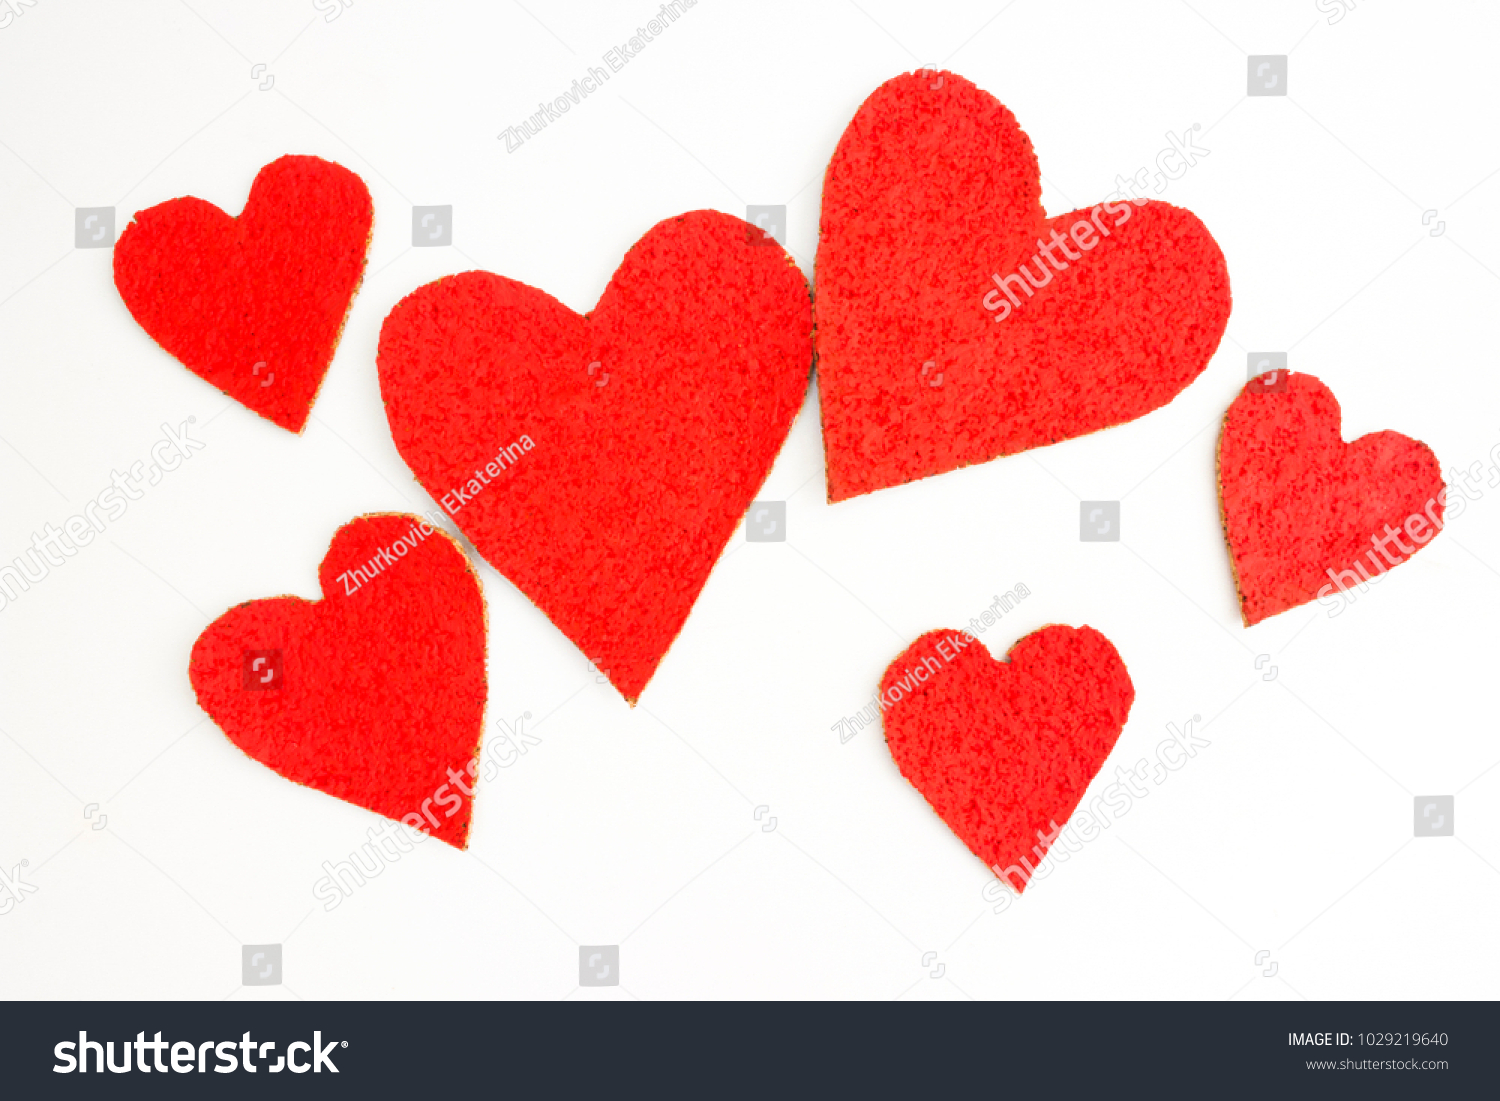 Bright red hearts of different sizes #1029219640